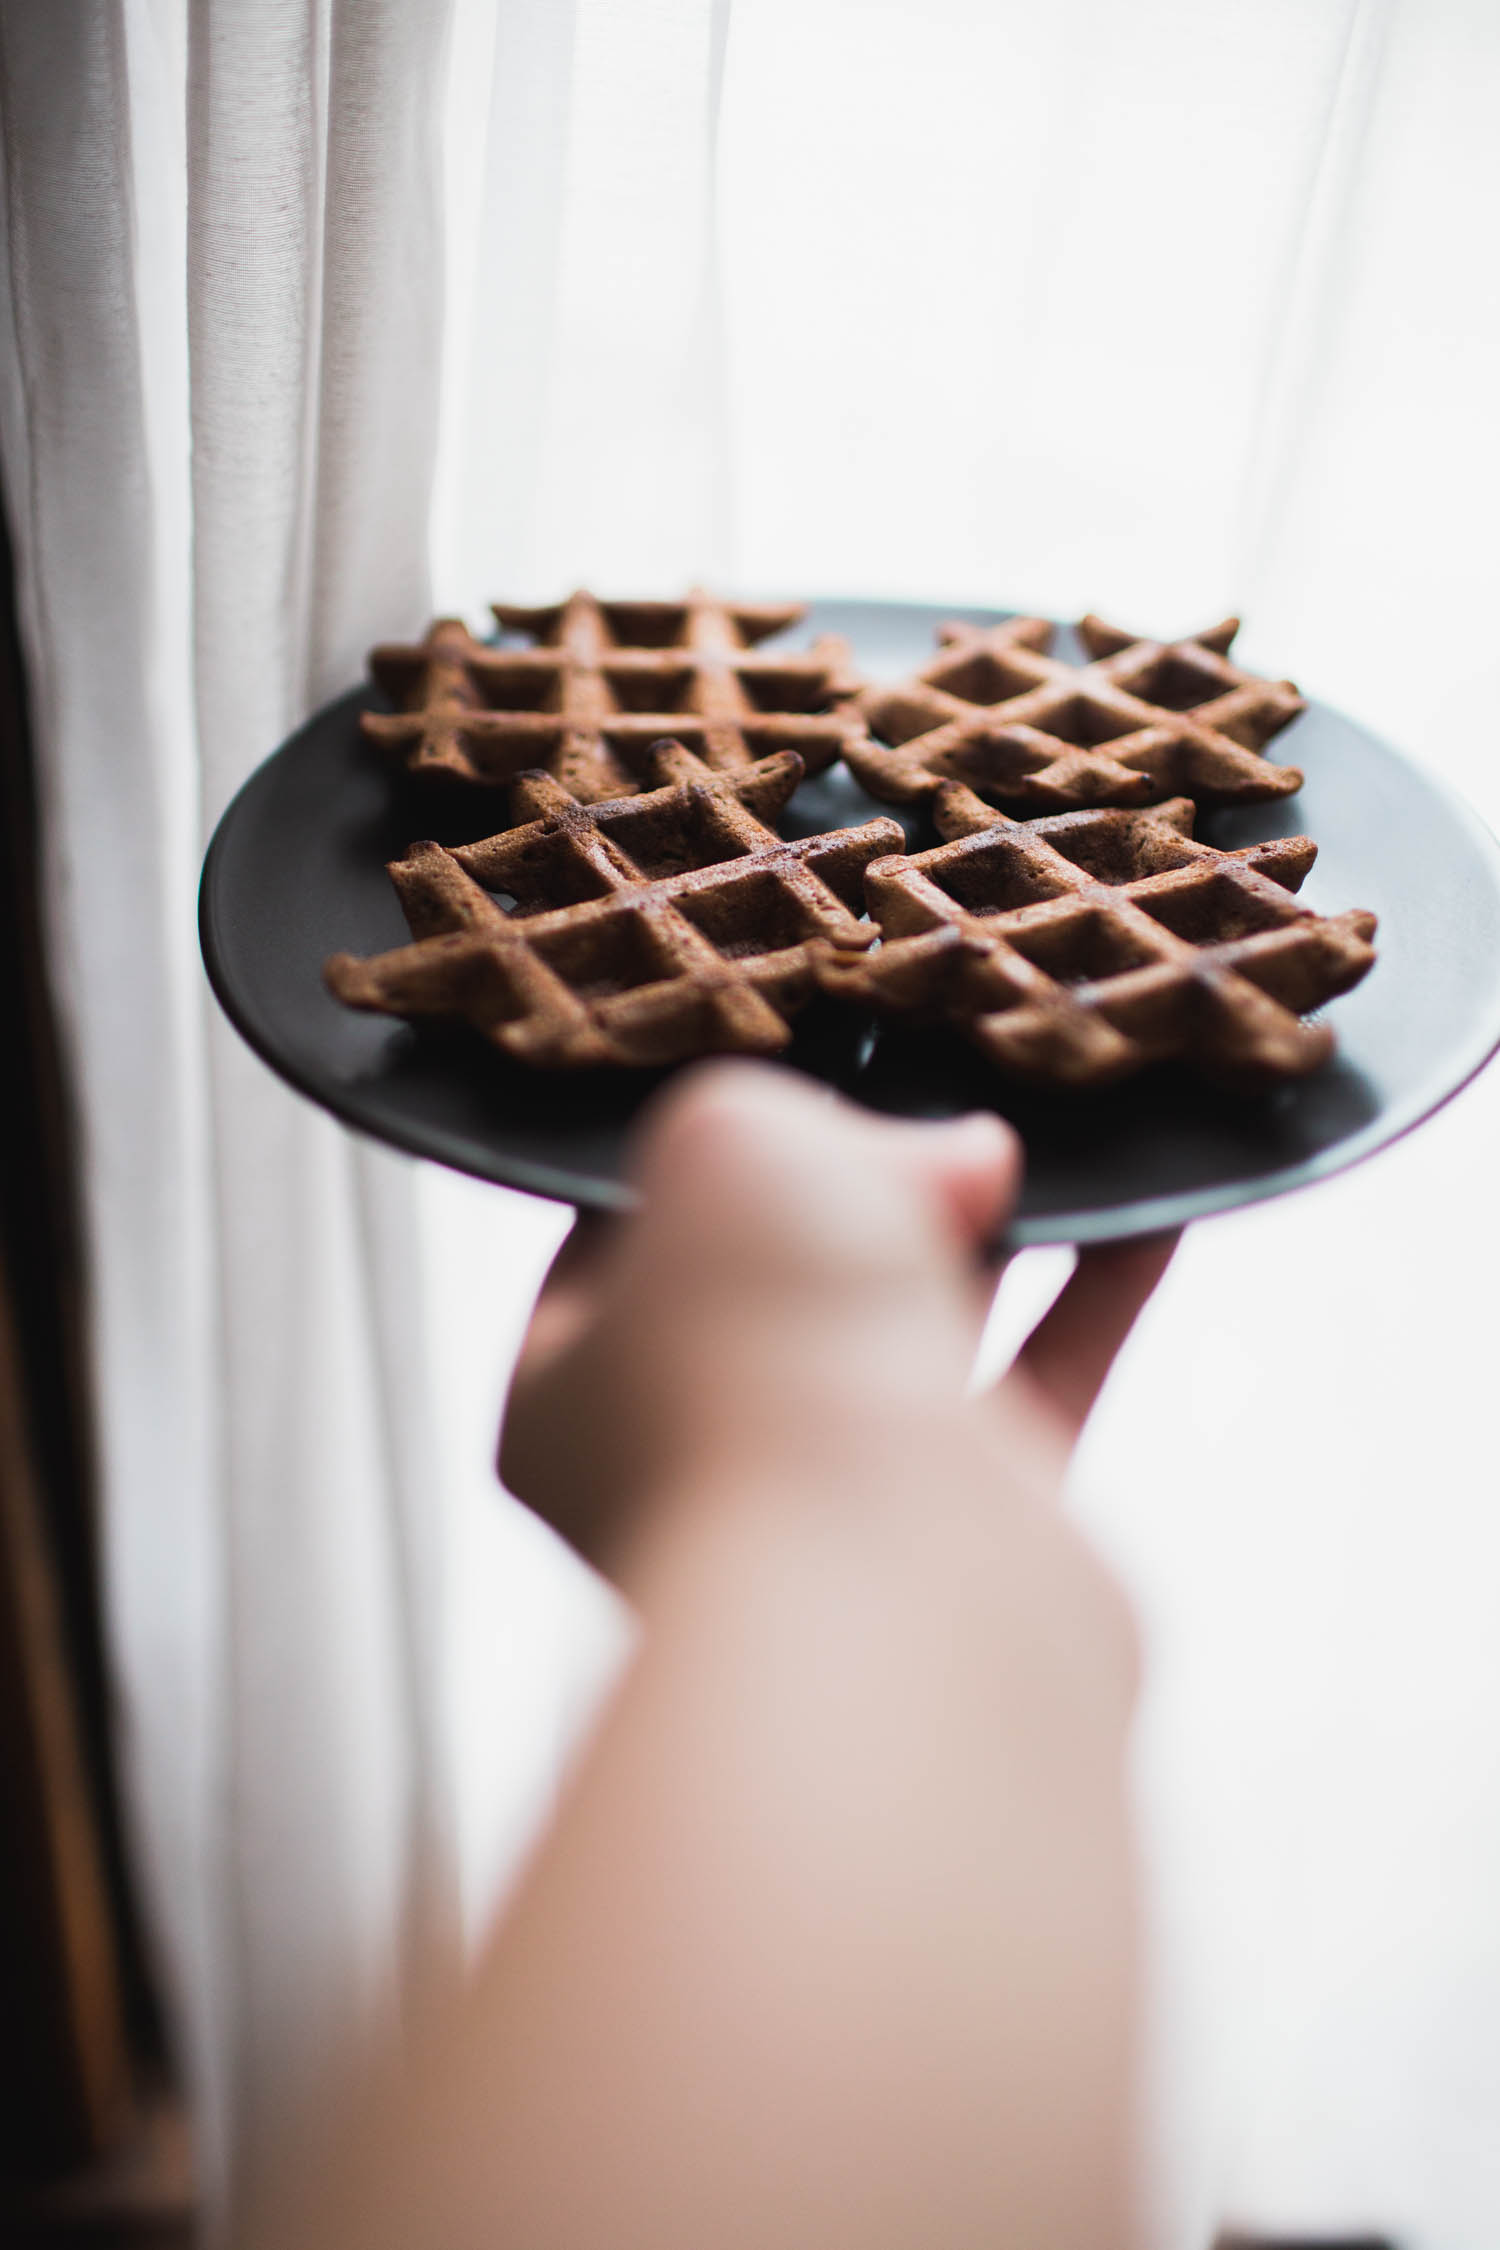 Vegan Cocoa Waffles With Caramelized Pears